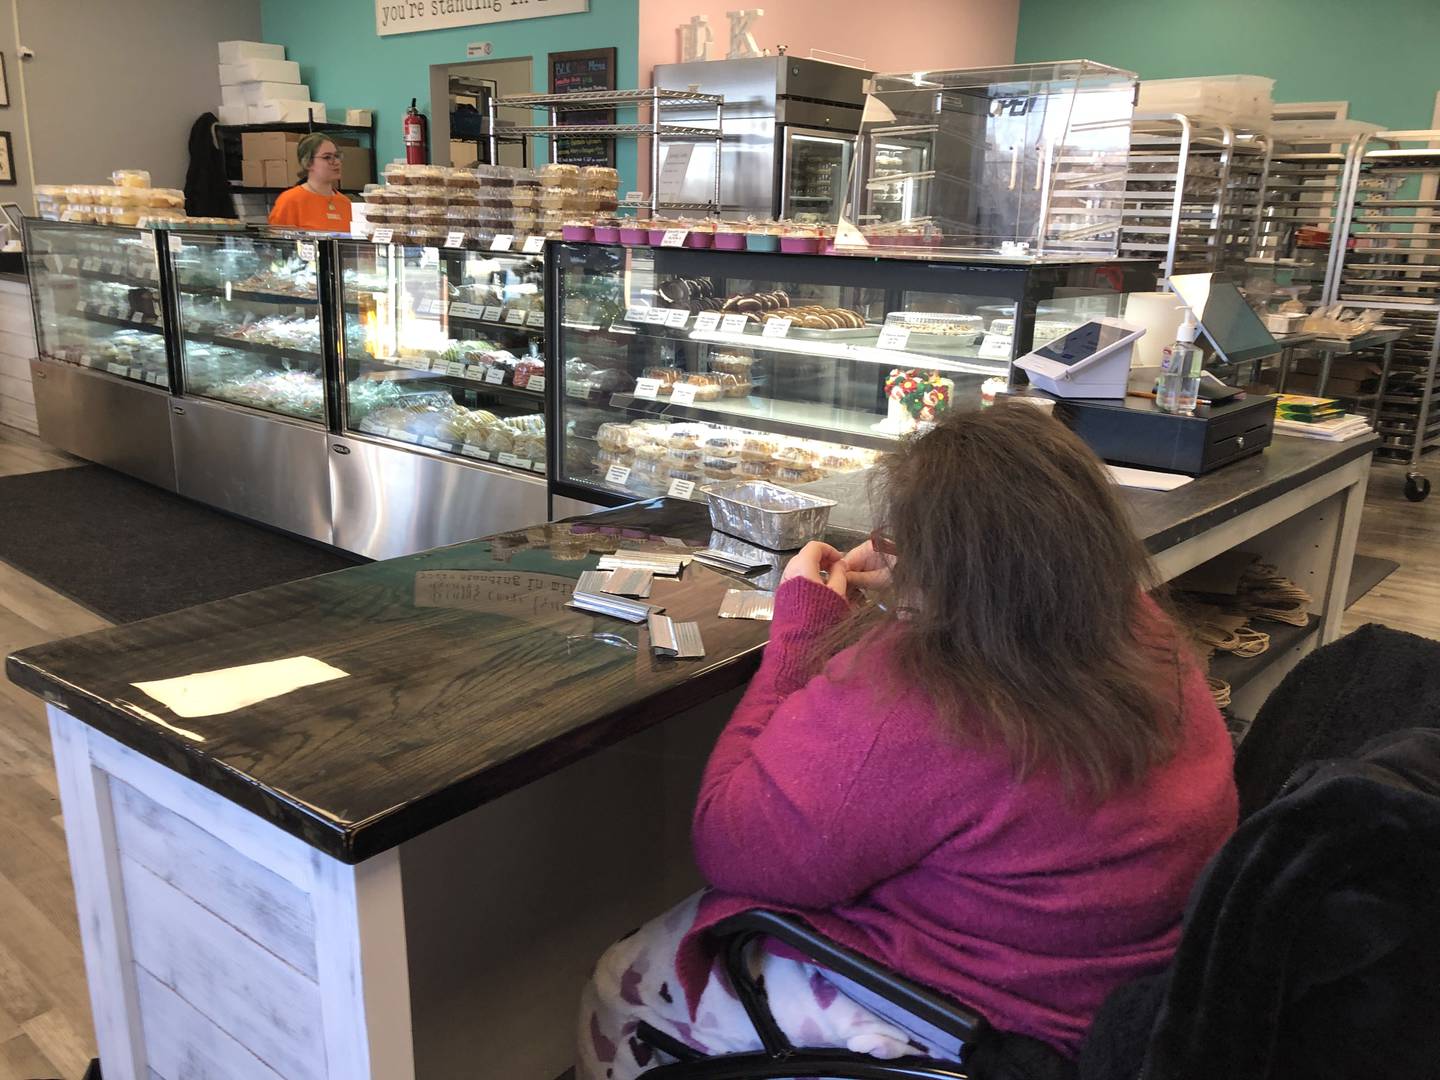 Teagan Haniszewski sits behind the counter at Blessed Little Kitchen in Huntley. The counter has no shelves so Haniszewski can sit closer to the counter.